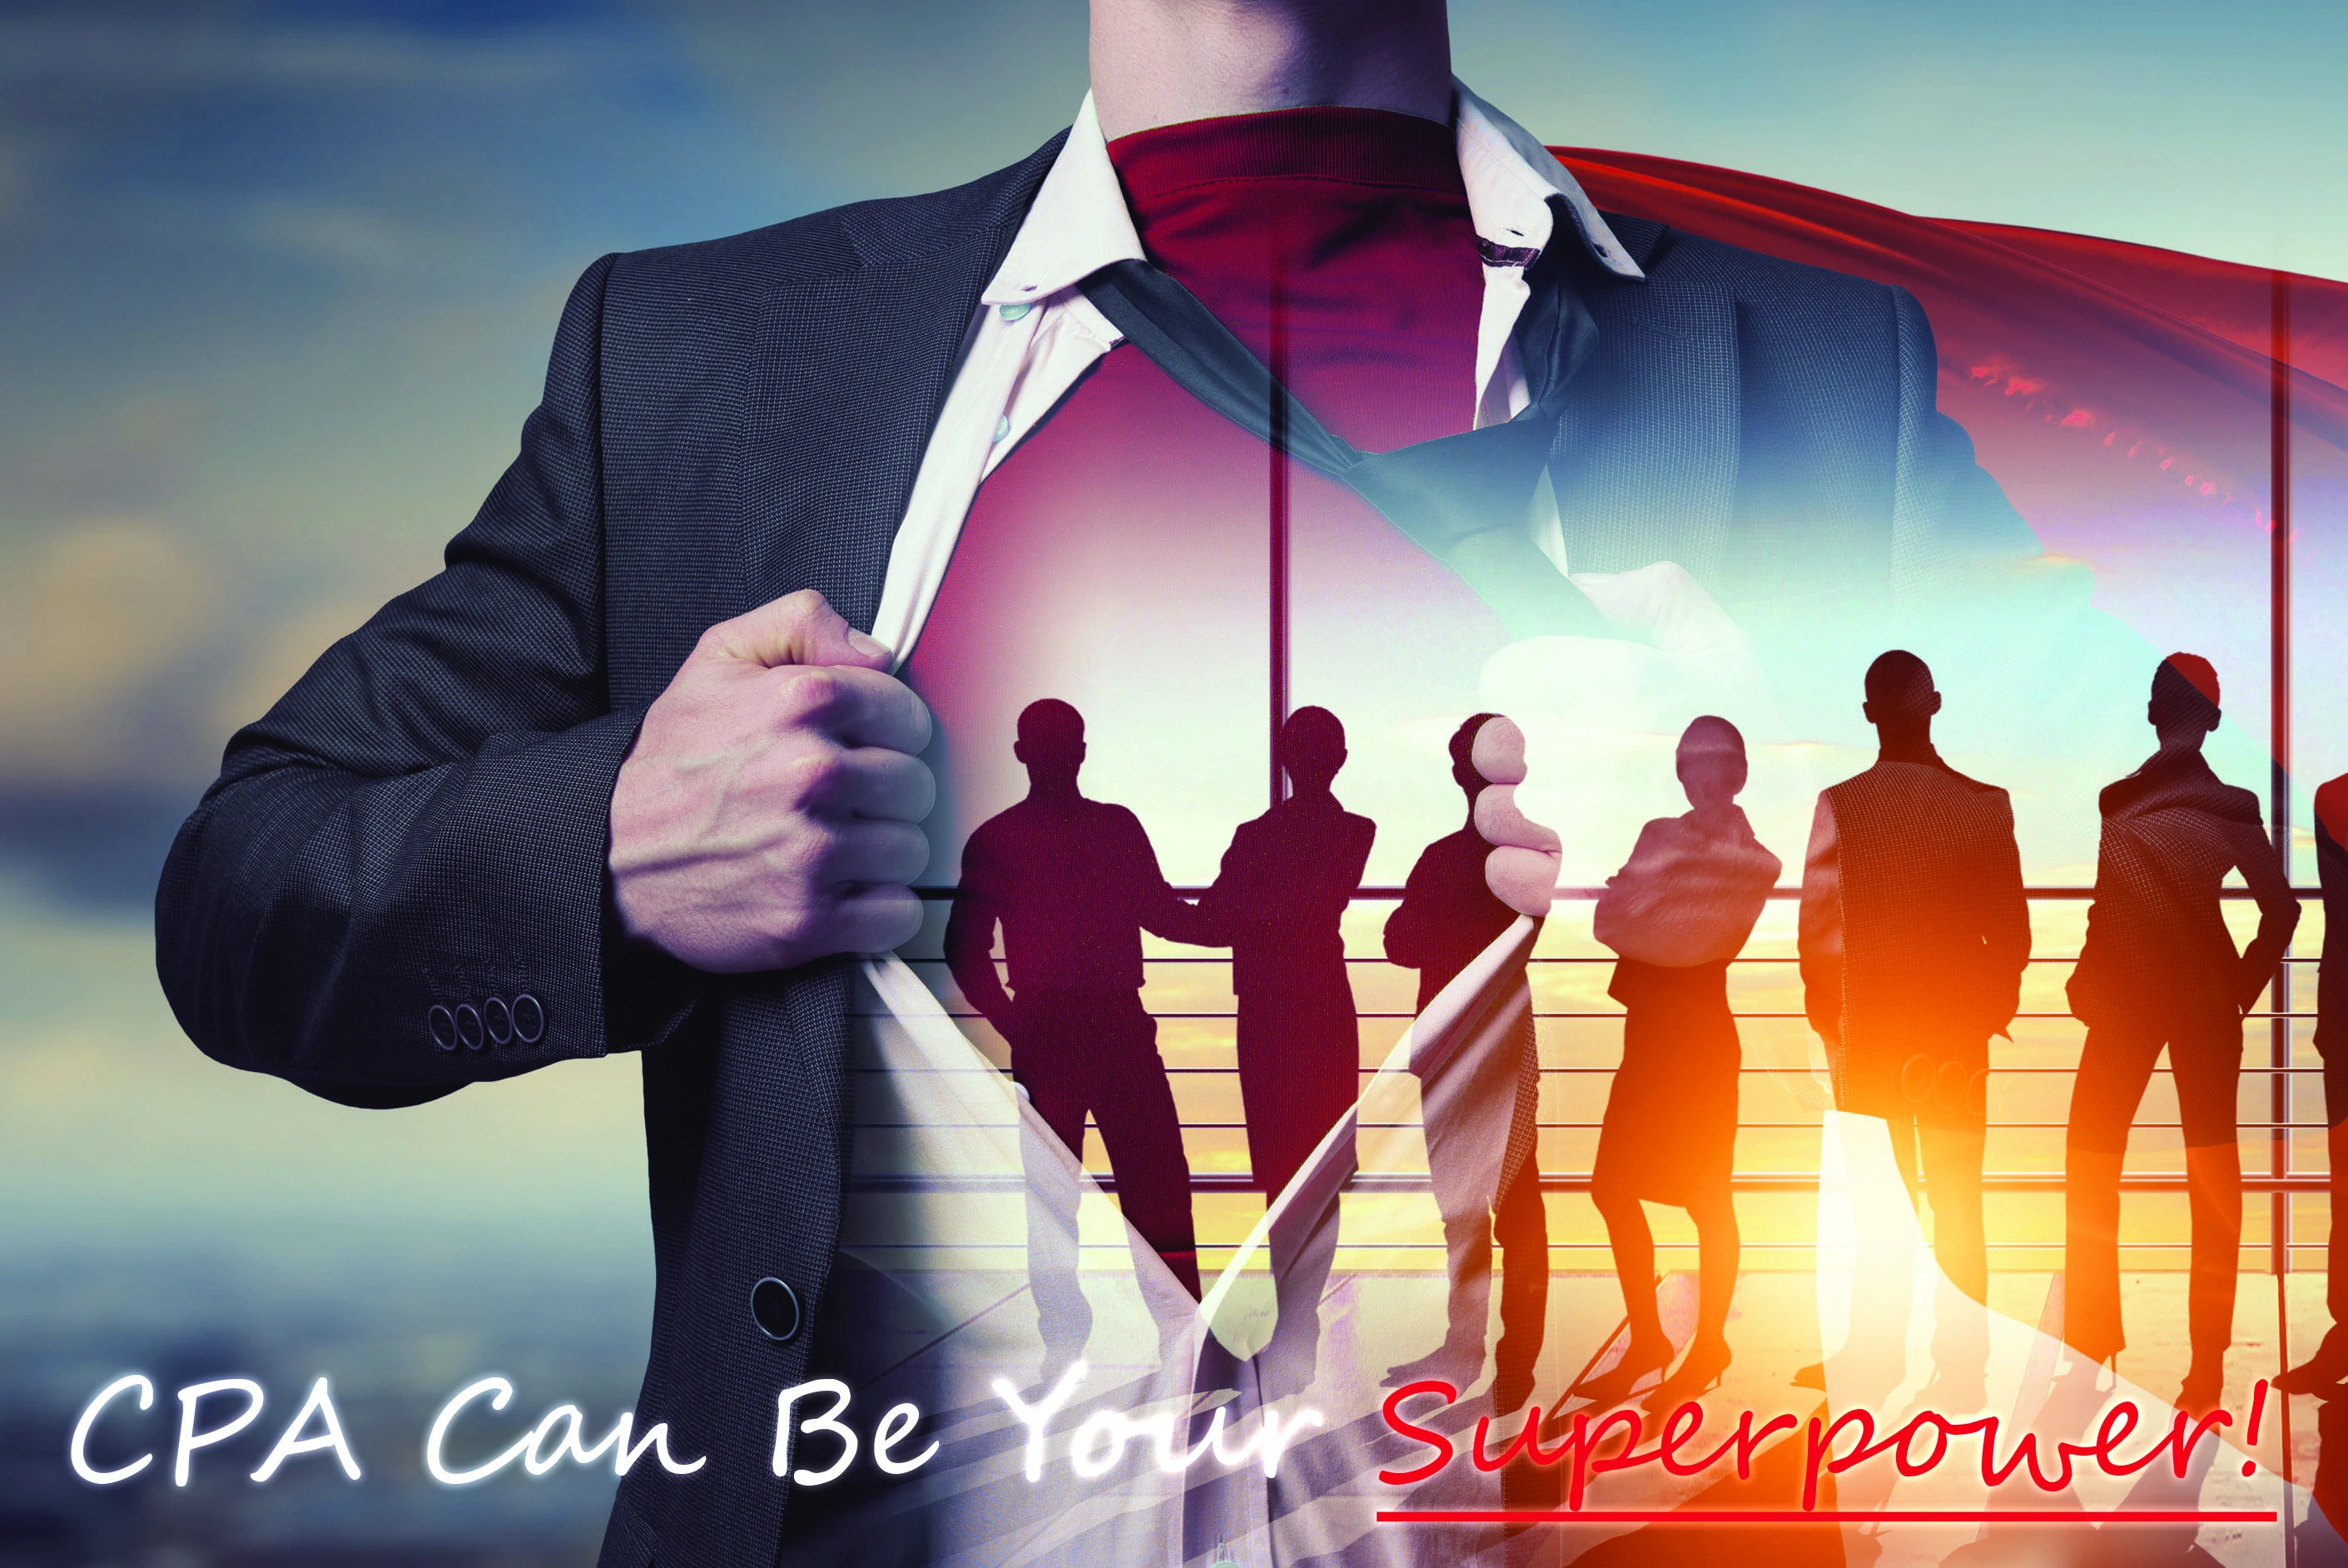 CPA Can Be Your Superpower!